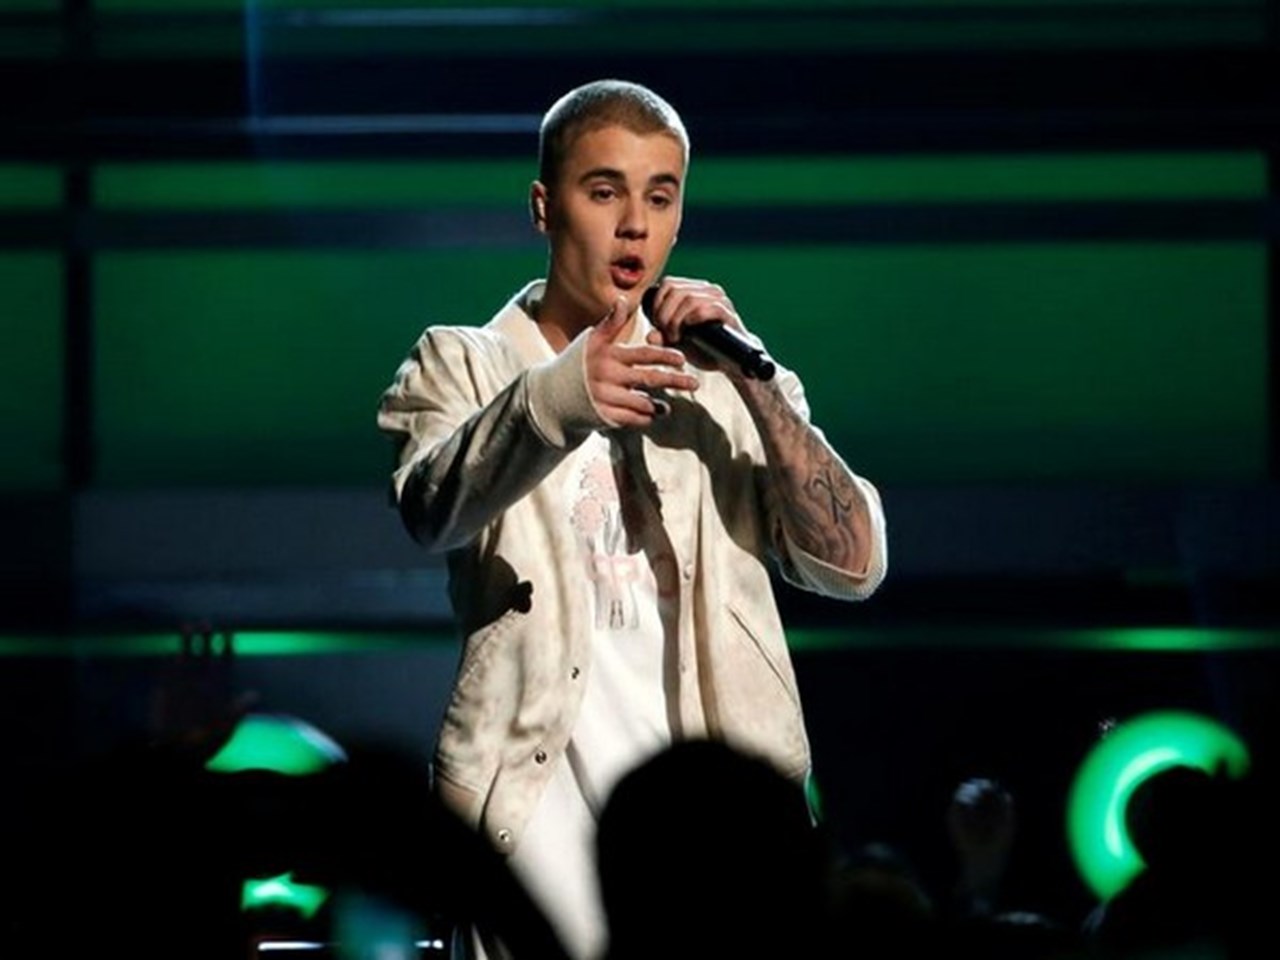 Justin Bieber wants to heal this broken planet with his new album Justice